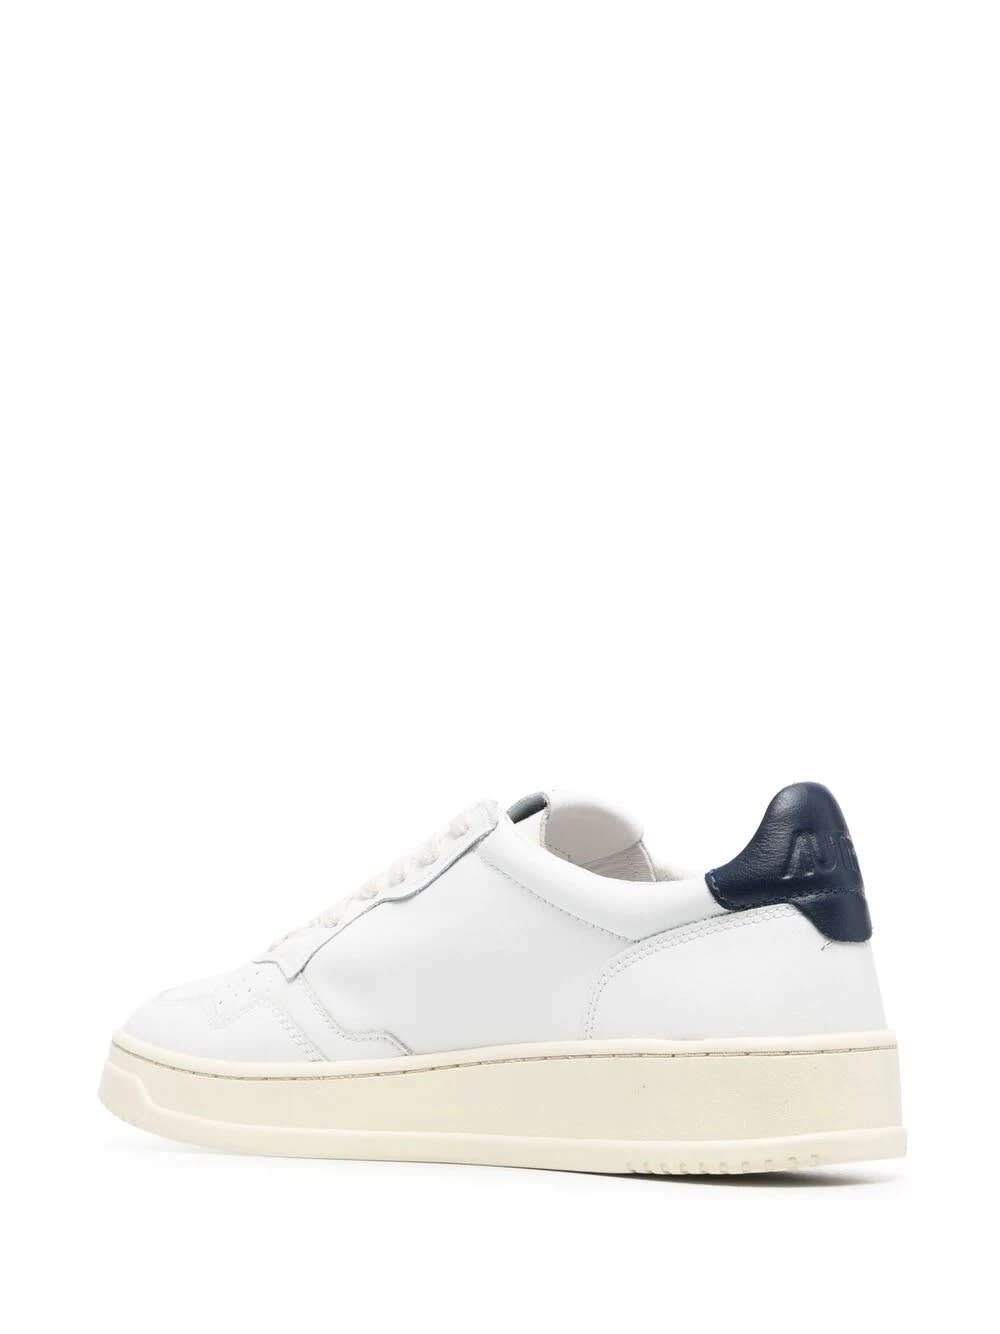 Shop Autry Medalist Low Sneakers In White And Navy Blue Leather In Black